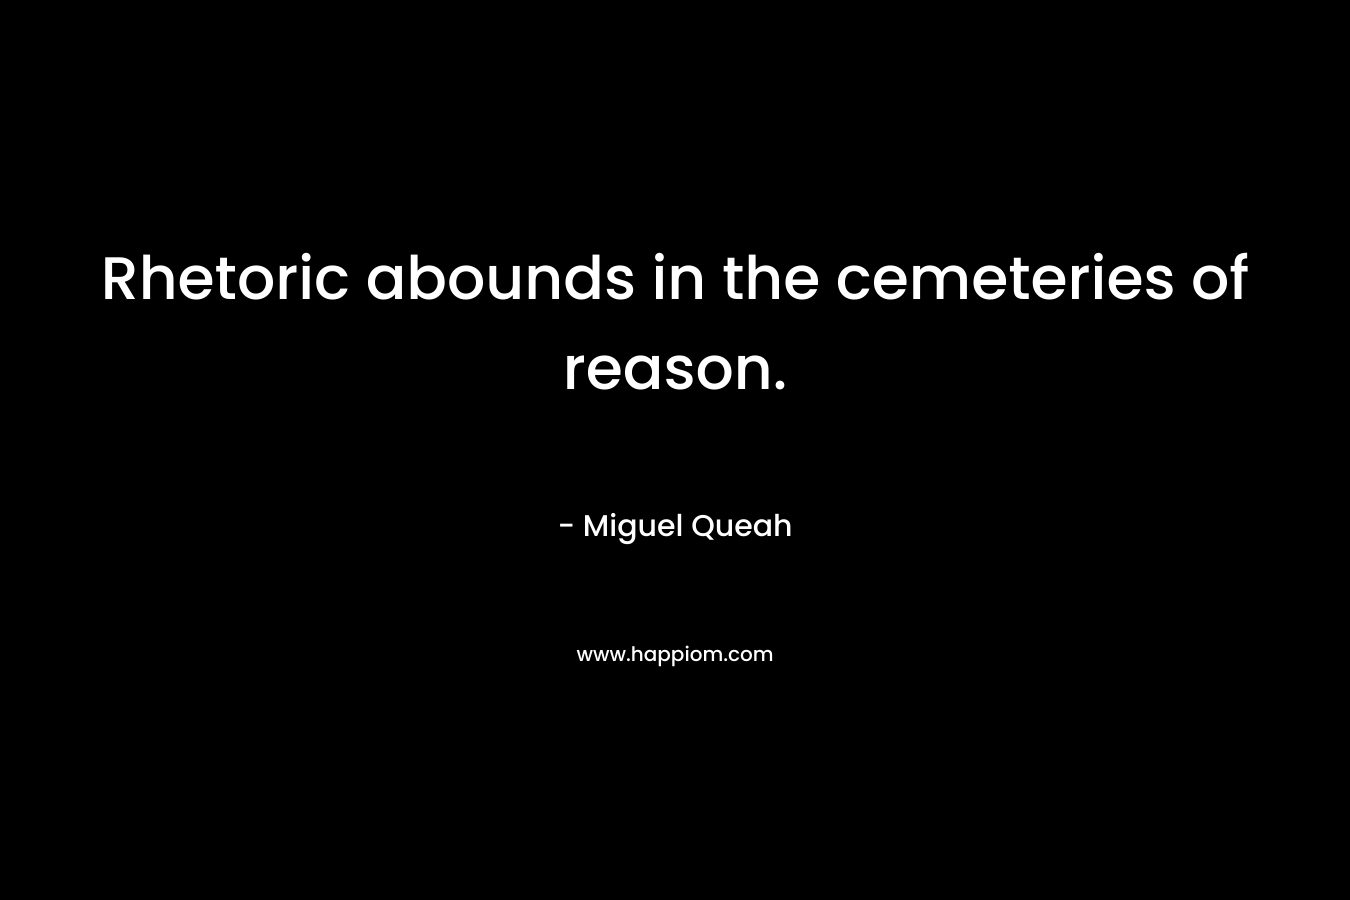 Rhetoric abounds in the cemeteries of reason. – Miguel Queah